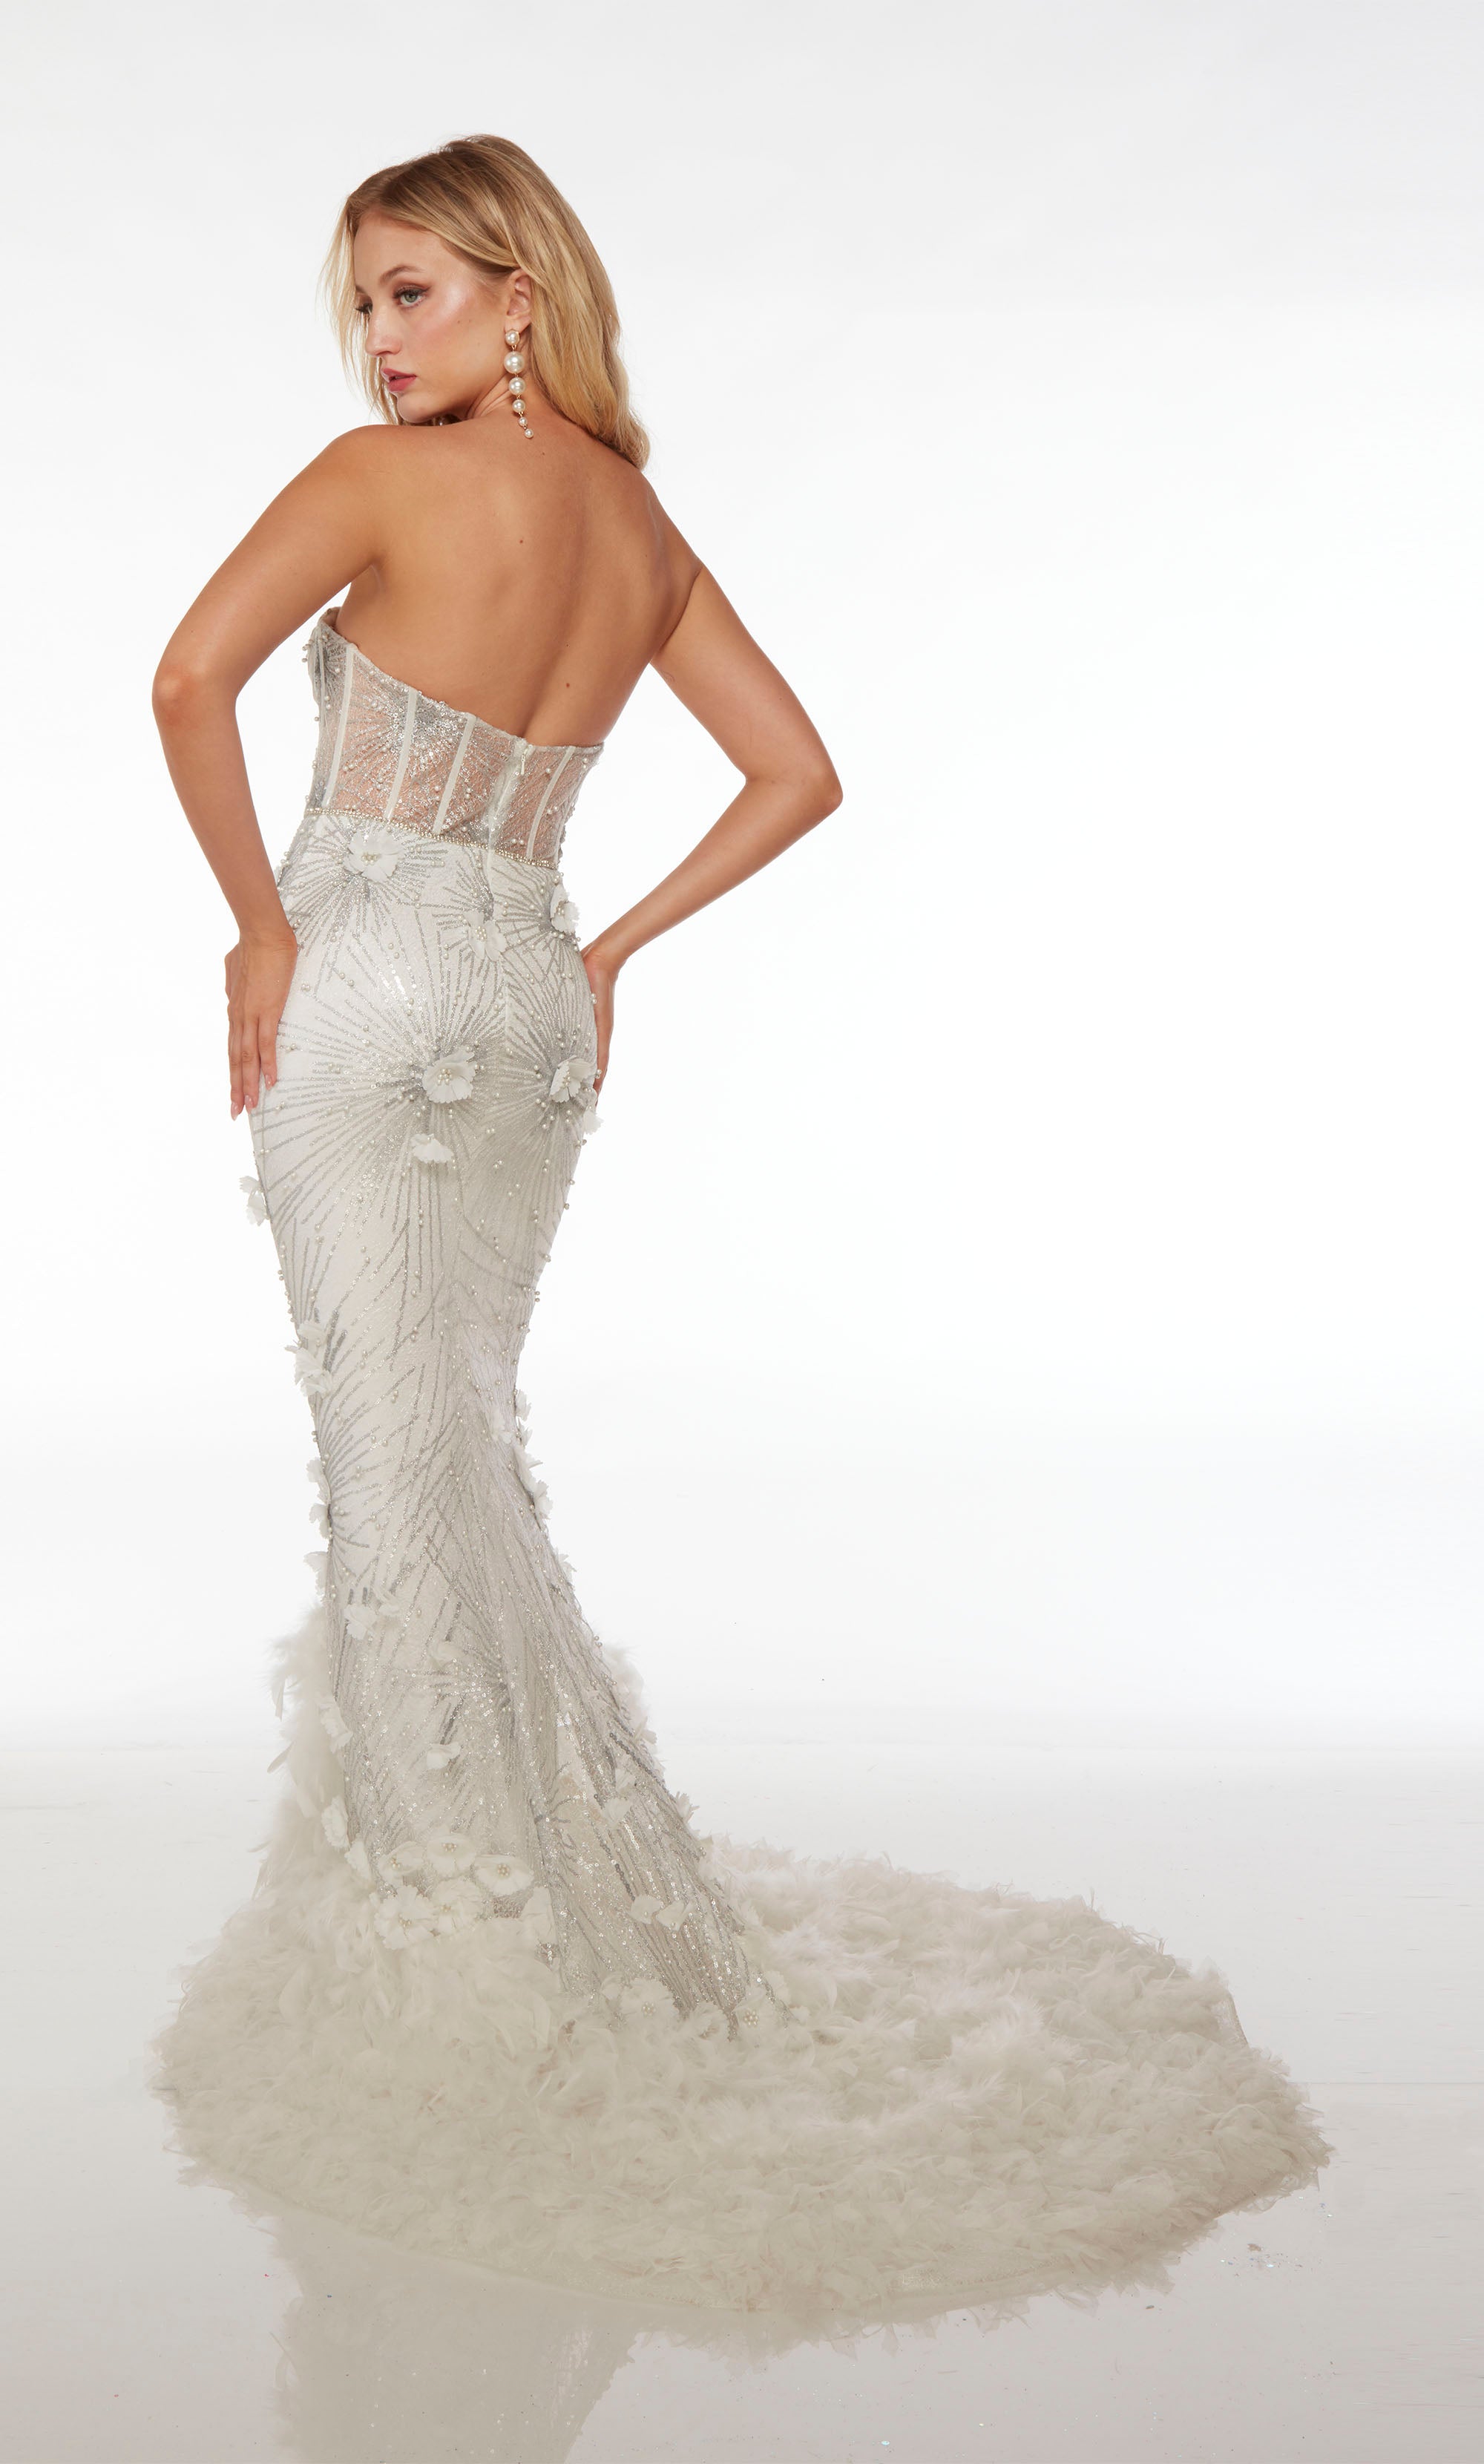 Strapless white-silver formal gown: sweetheart neckline, corset bodice, keyhole detail, mermaid silhouette, adorned with 3D flowers in glitter tulle fabric.